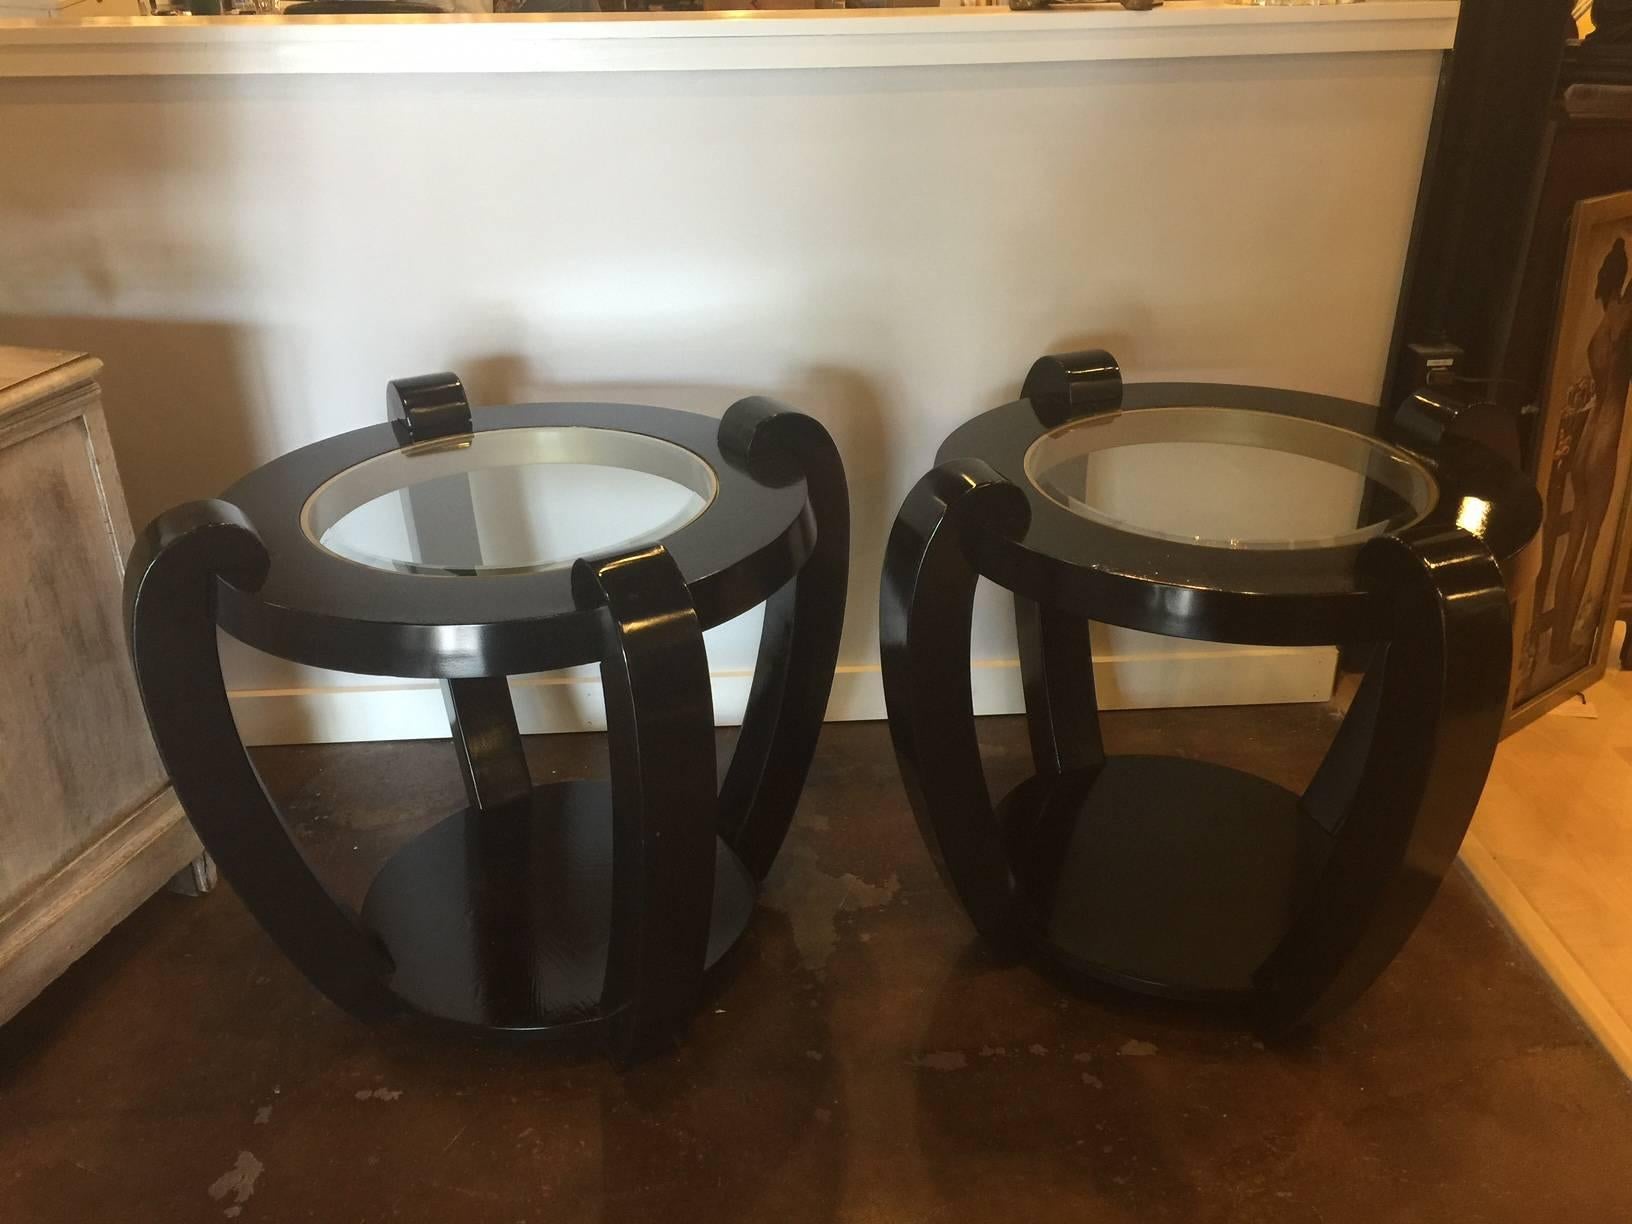 This is a heavy pair of side tables with unique styling, black and gold lacquer, and beveled glass top inserts. There is a shelf at the bottom of each table and they are bracketed by substantial braces creating this MCM styling. Made of heavy wood